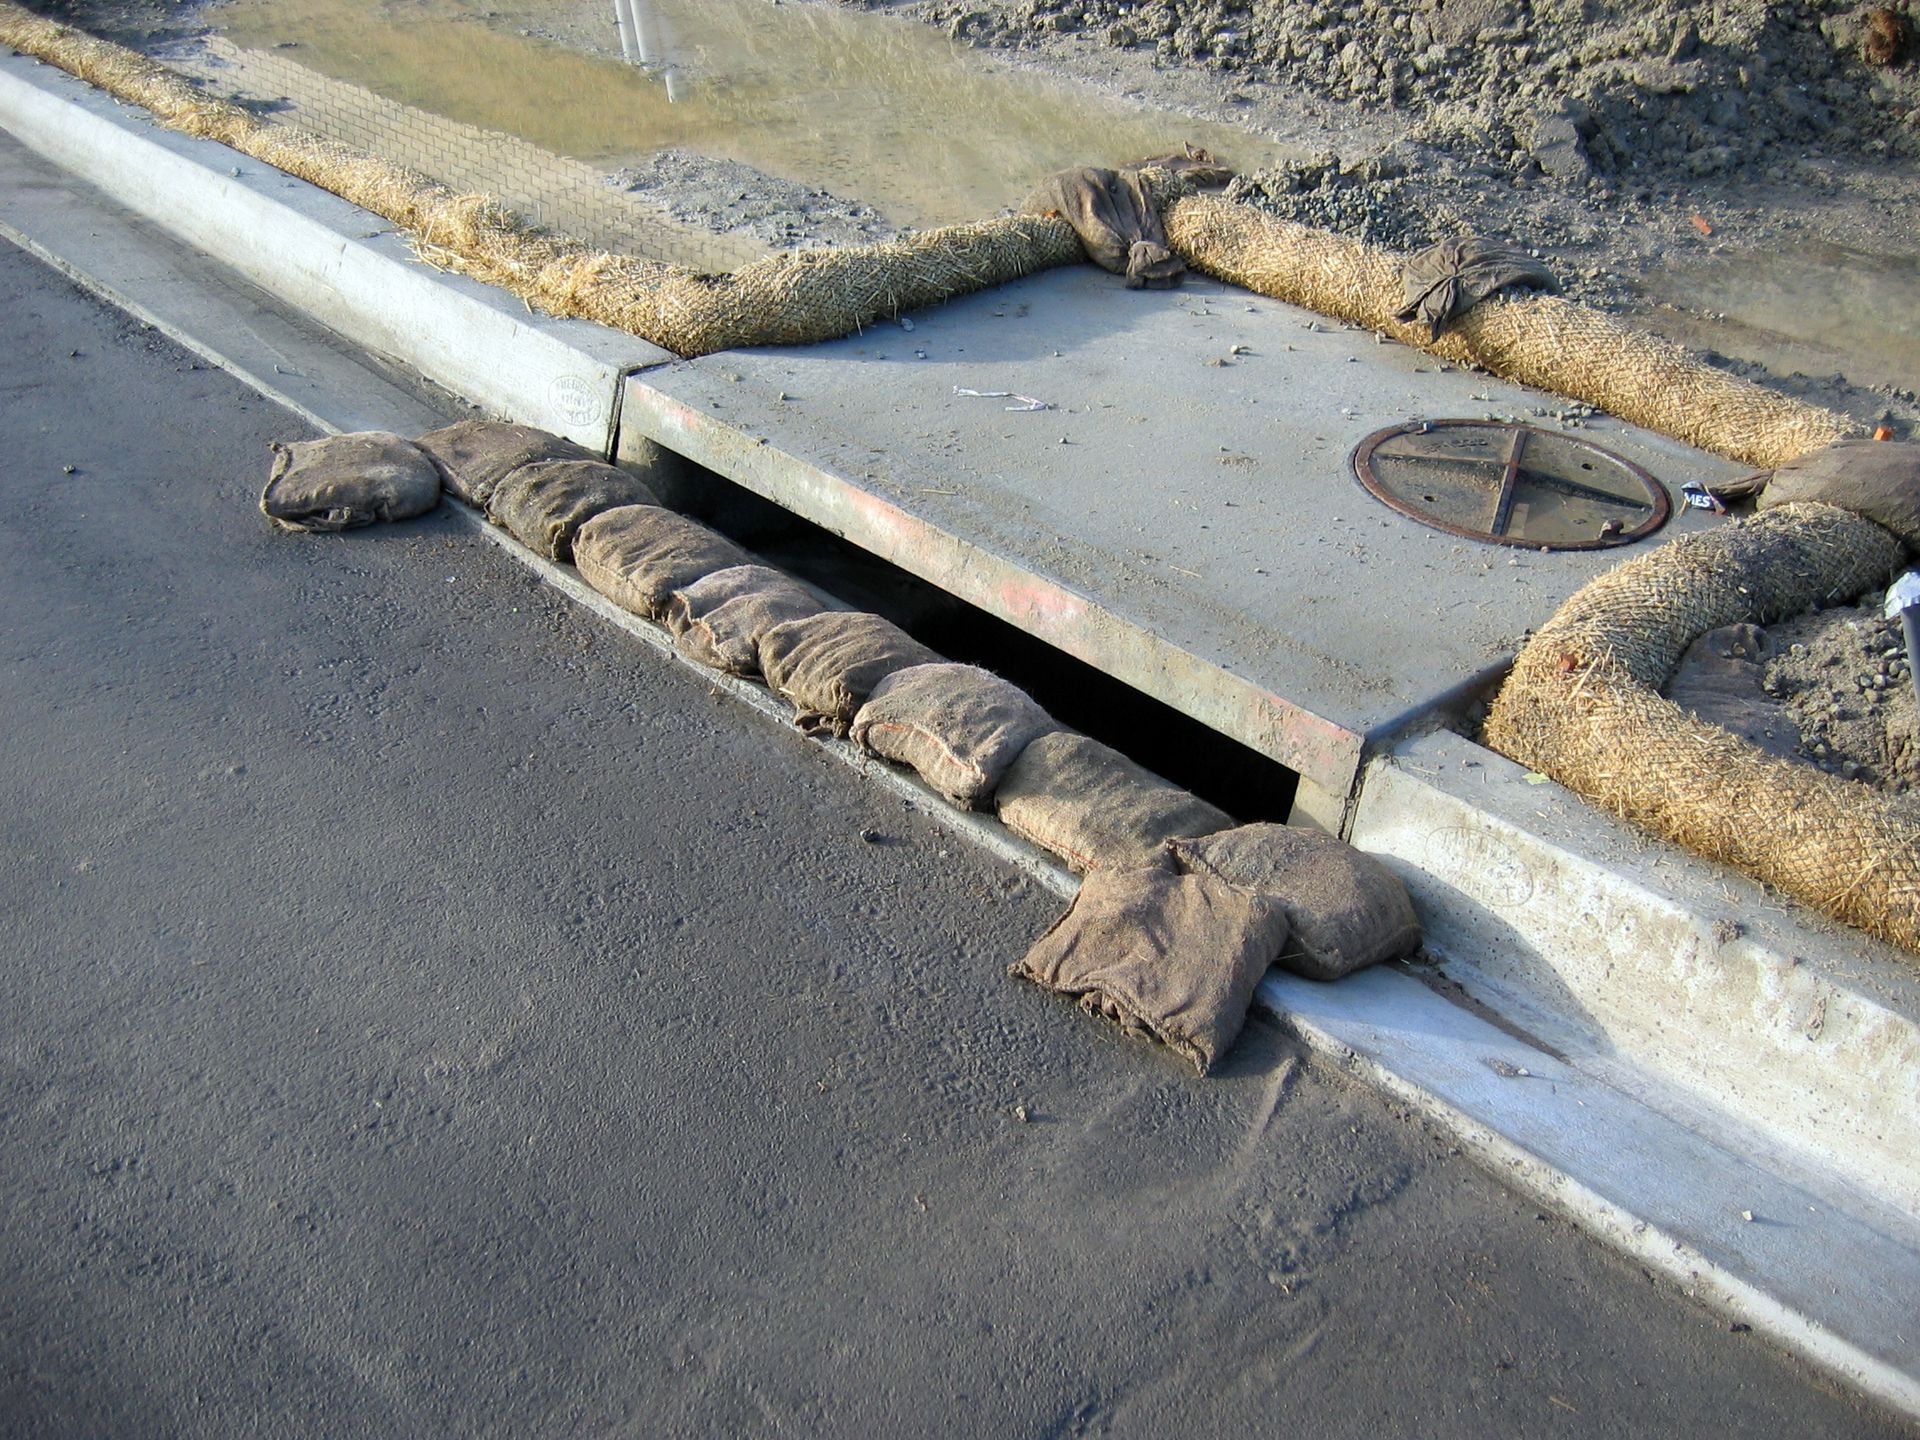 storm drain inlet protection investment can avoid a complete environmental catastrophe.